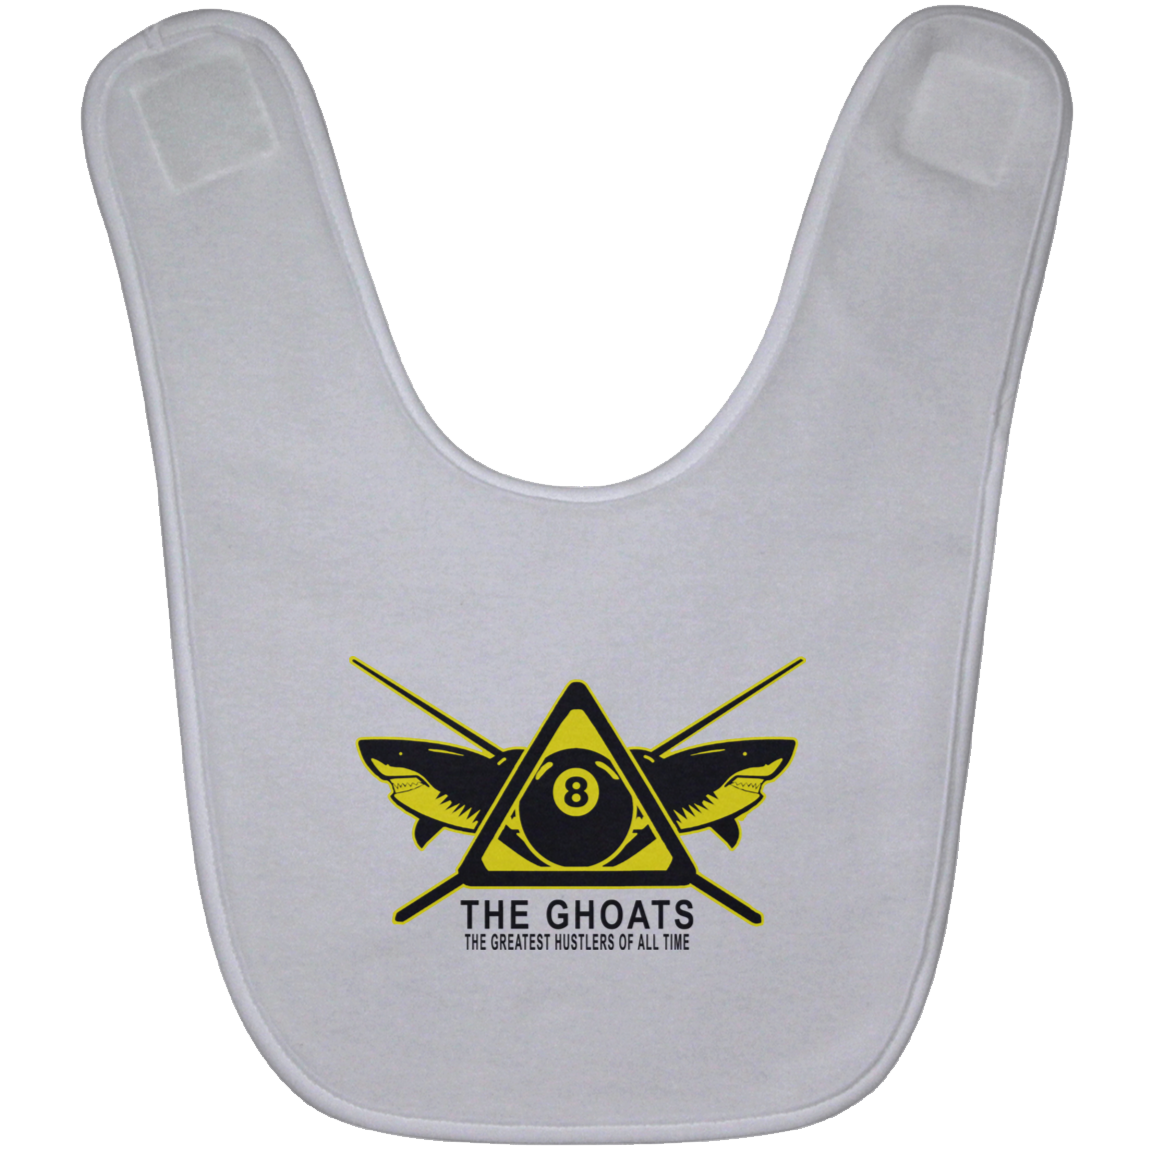 The GHOATS custom design #31. Shark Sighted. Male Pool Shark. Shoot At Your Own Risk. Pool / Billiards. Baby Bib